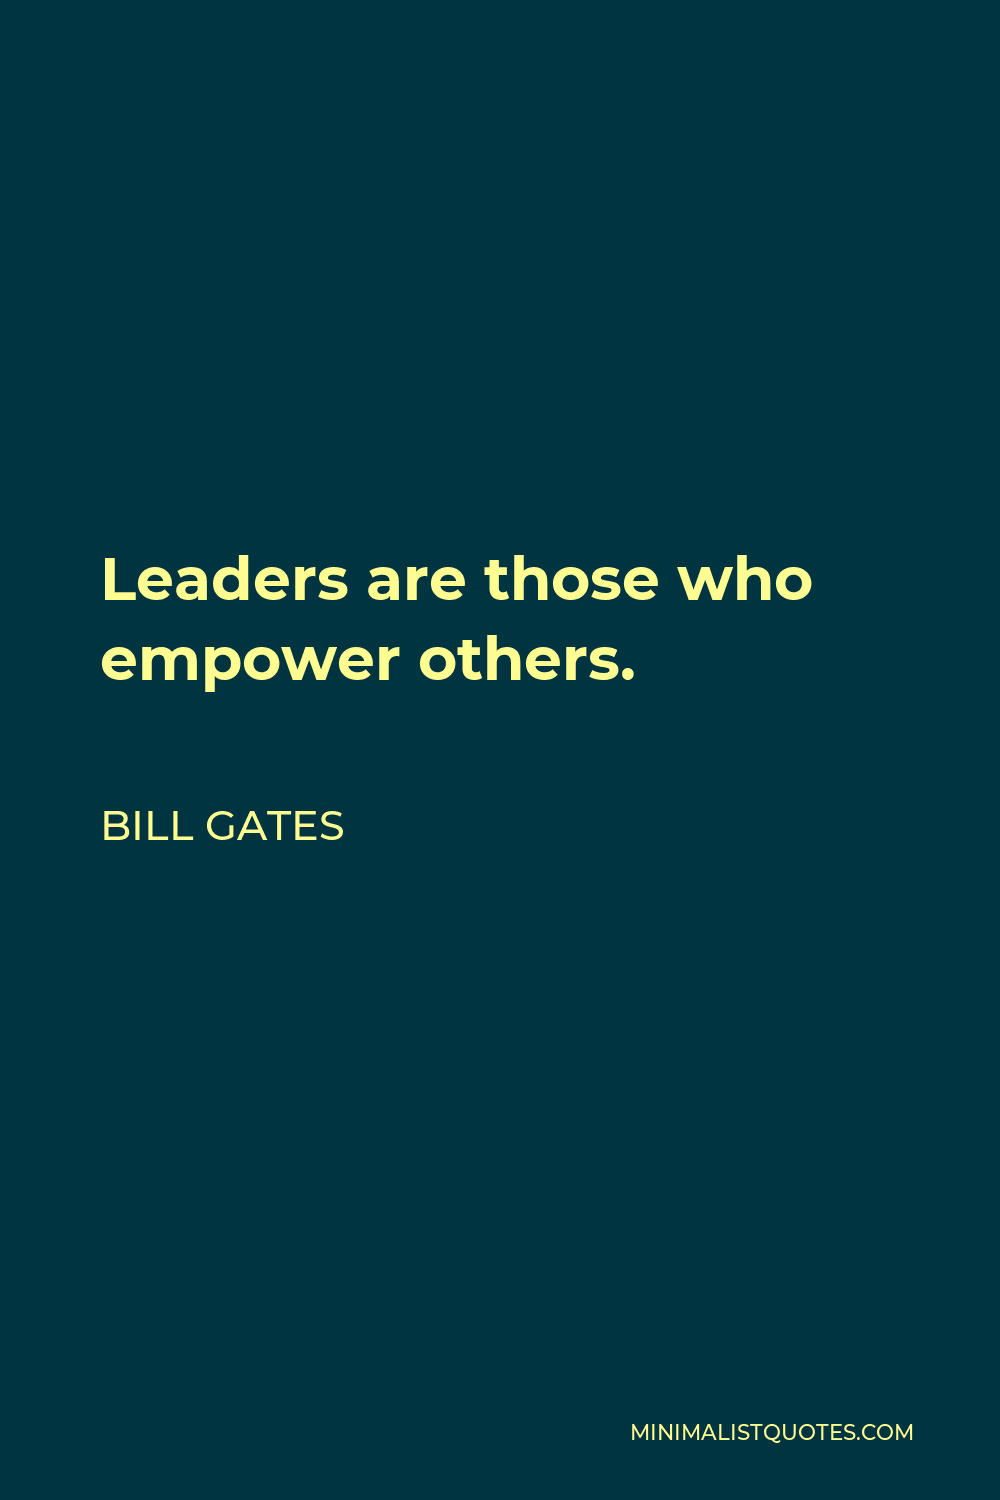 Bill Gates Quote - Leaders are those who empower others.